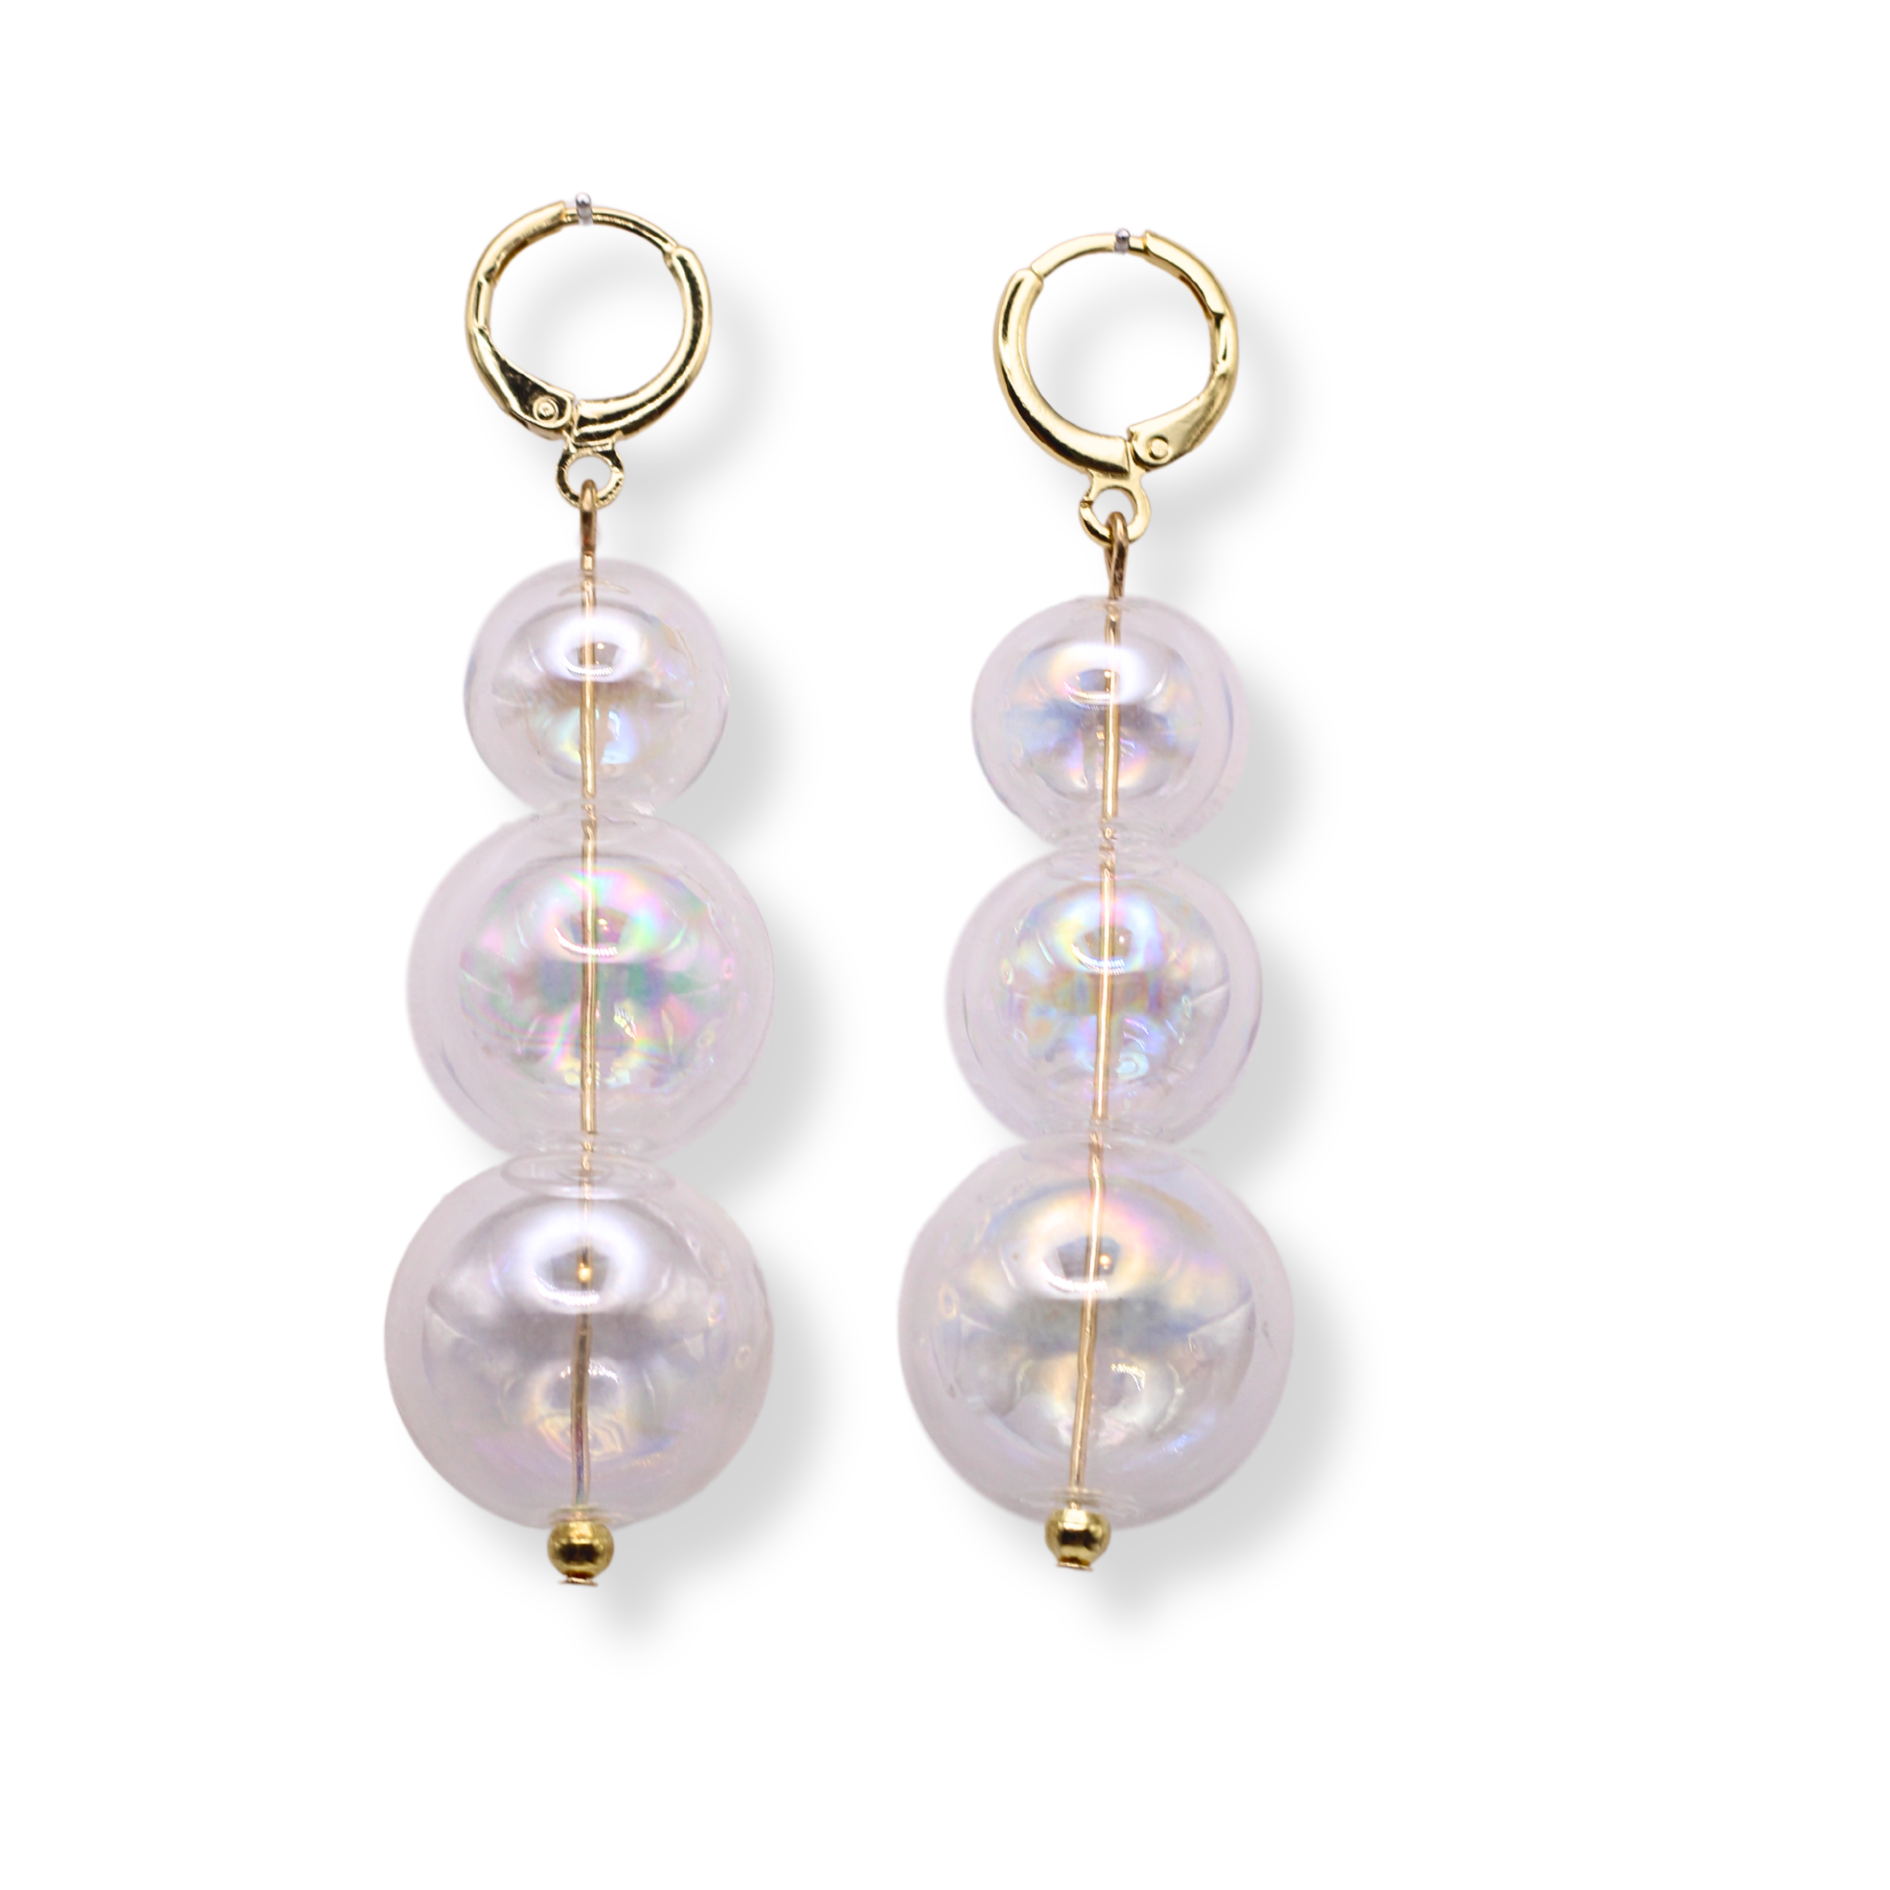 The Penelope earrings can add a whimsical touch to your collection. They are are made with hand blown iridescent glass beads and hypoallergenic Huggie hoops. They’re the perfect balance between minimal and show stopping!